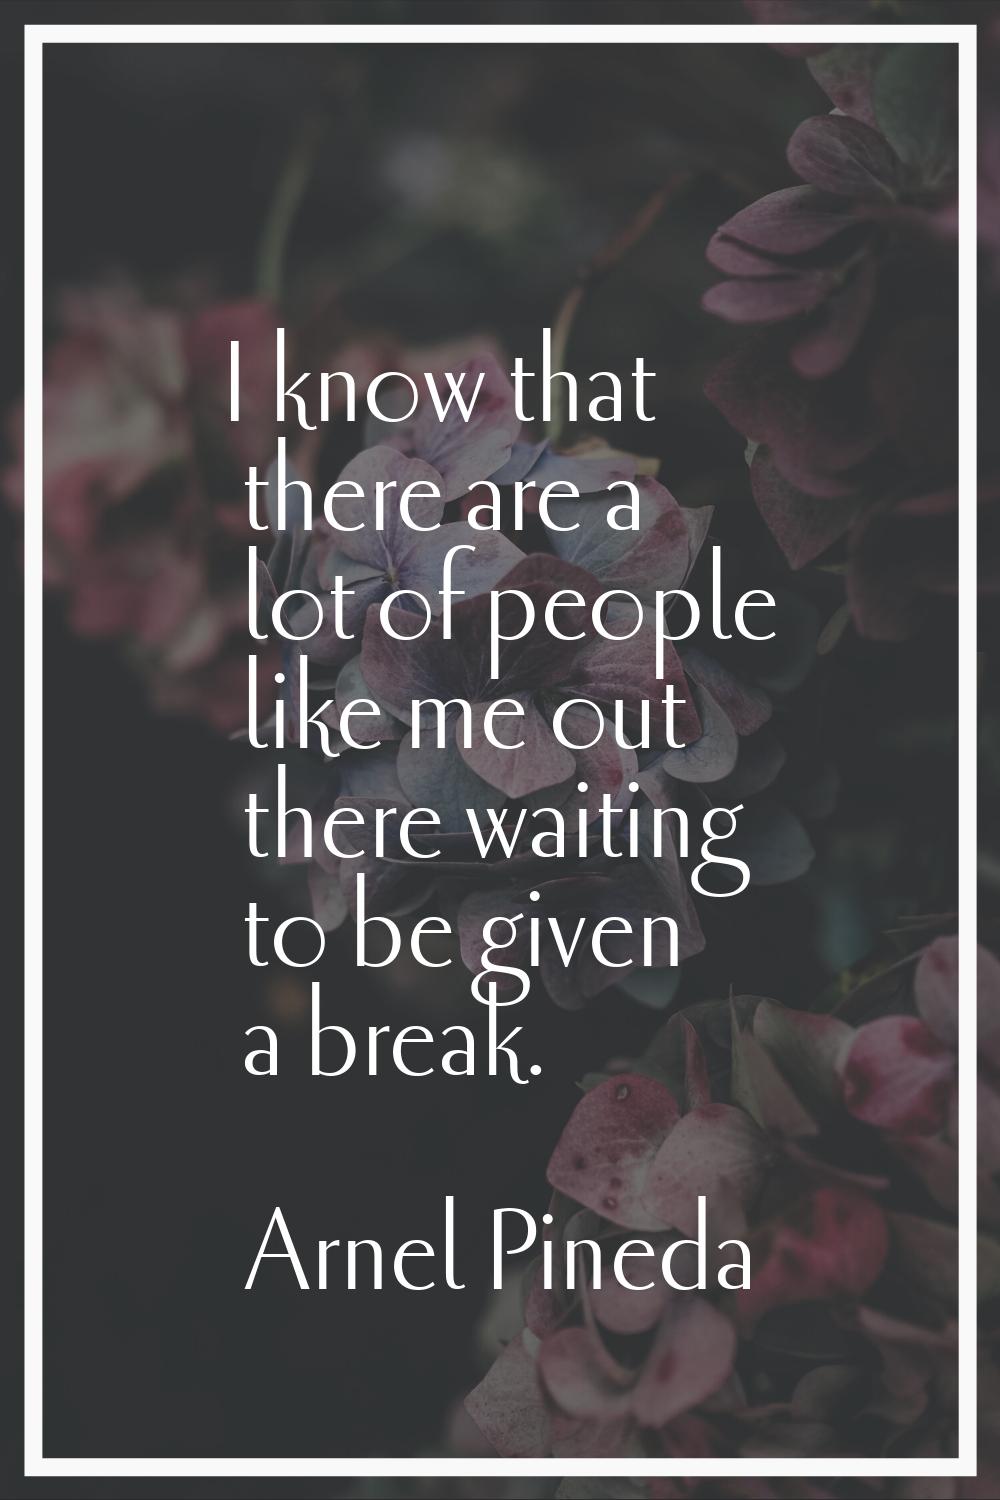 I know that there are a lot of people like me out there waiting to be given a break.